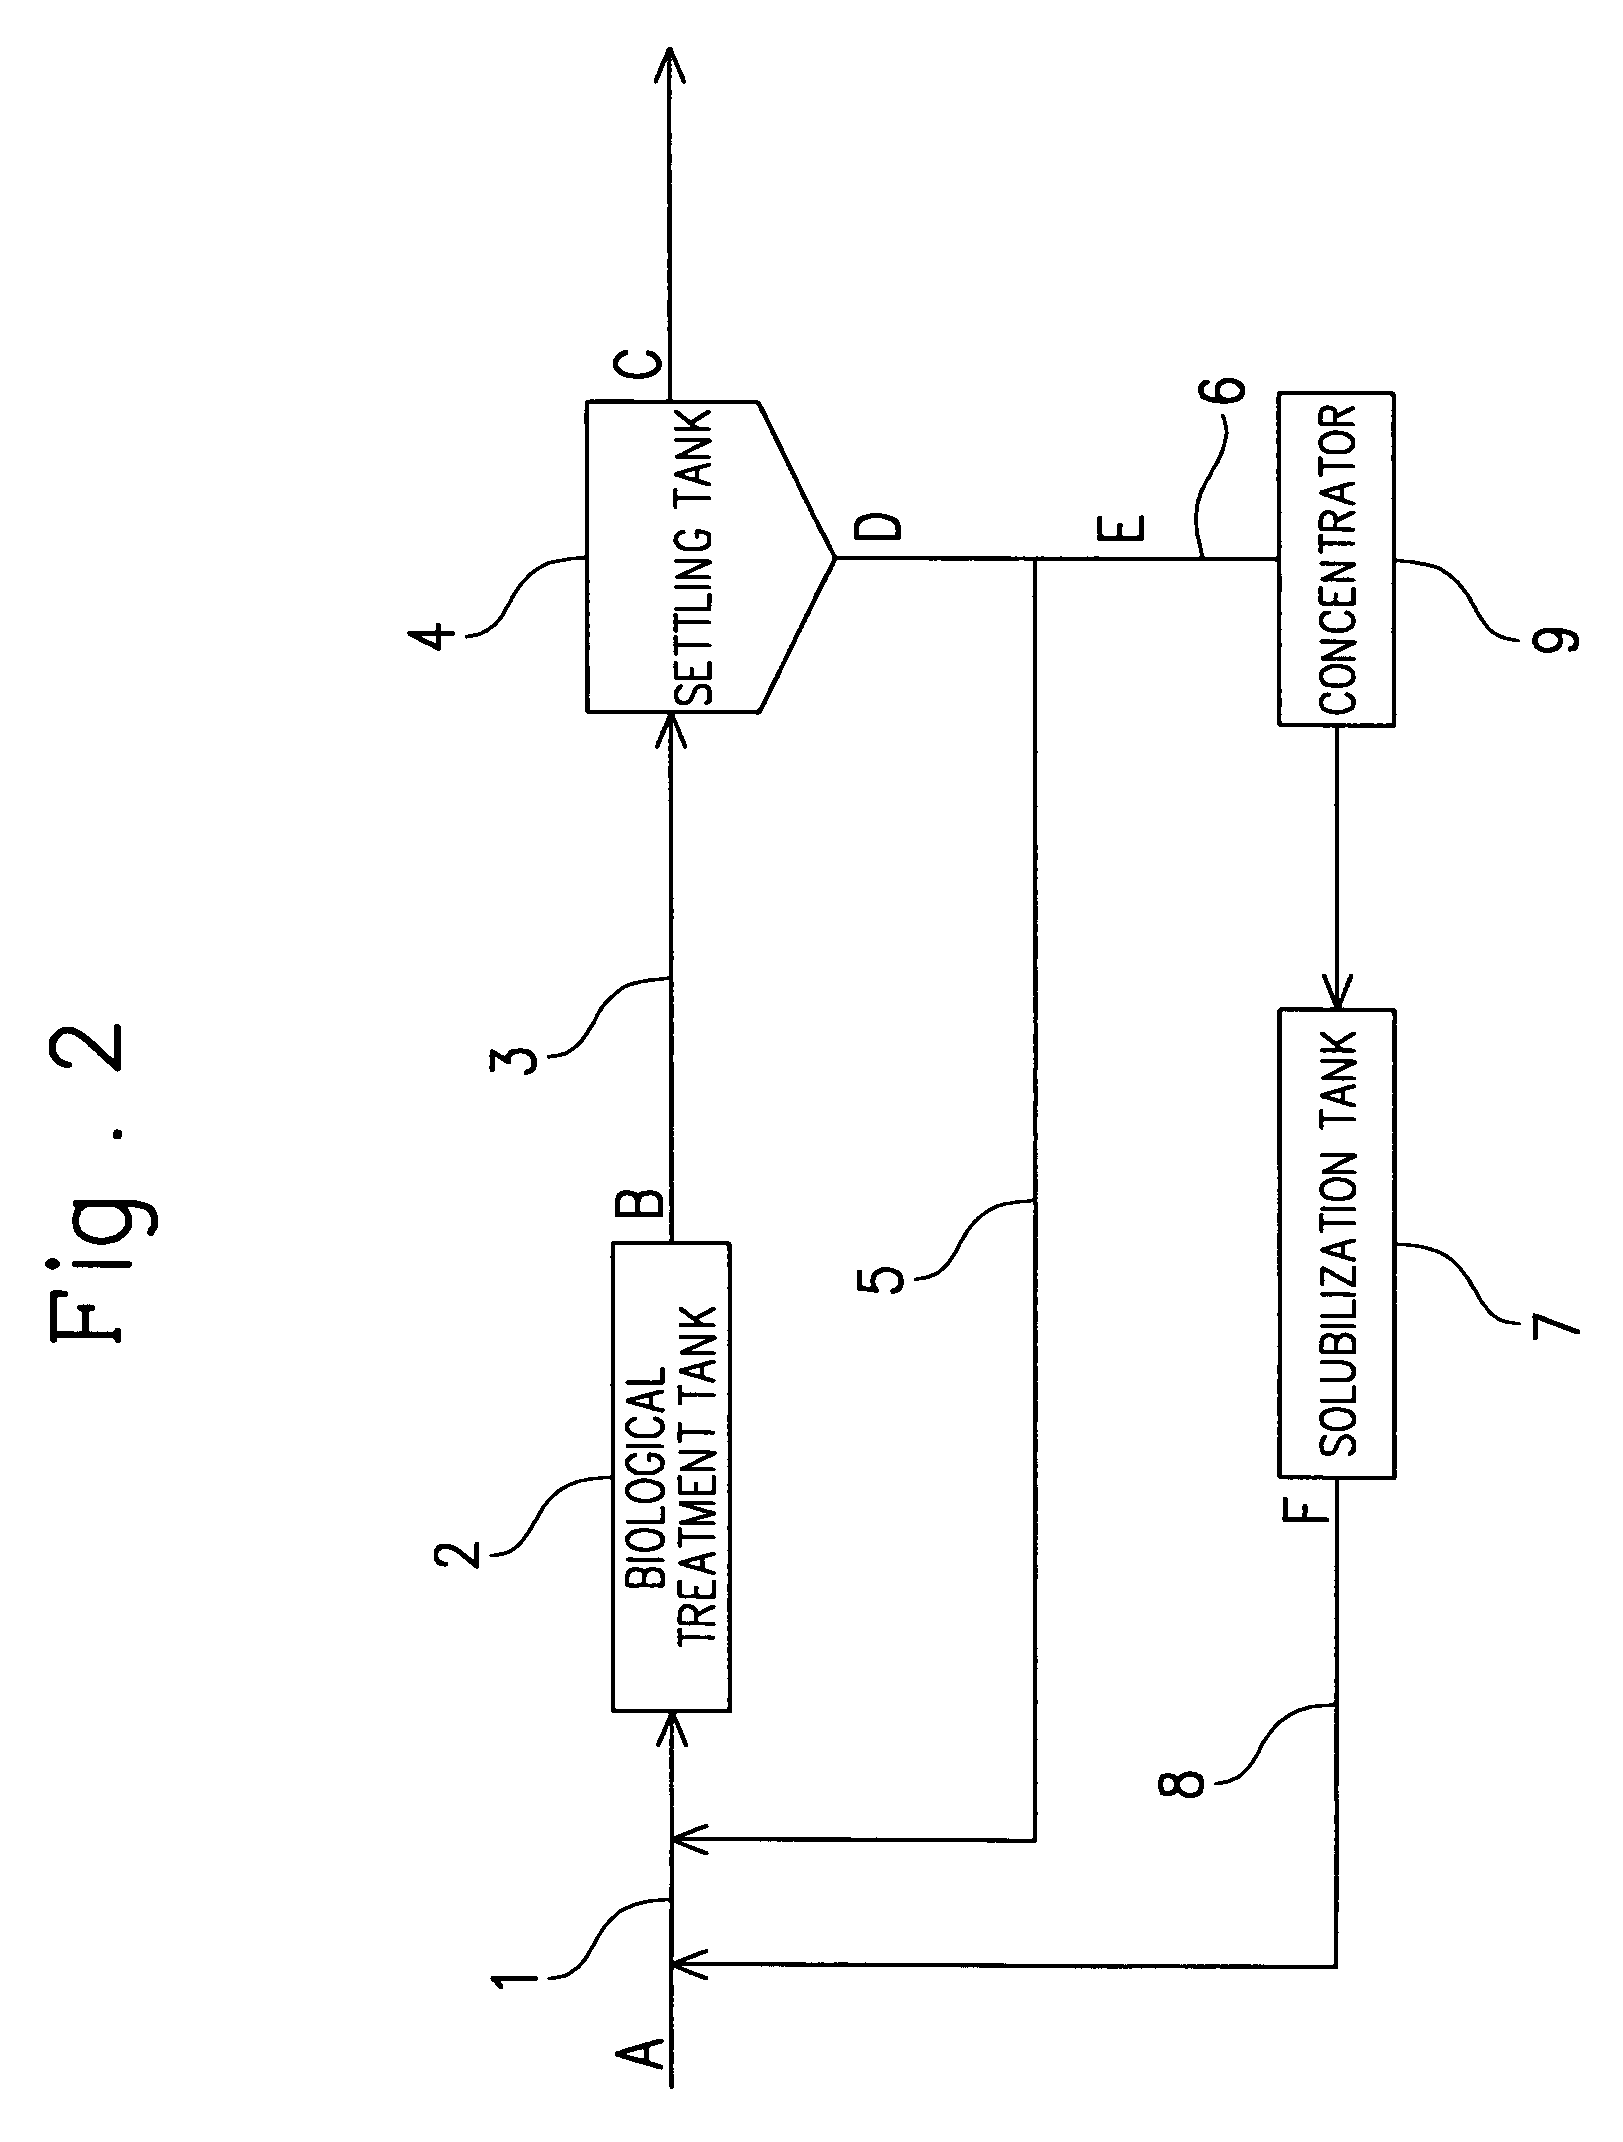 Novel microorganism and process for treatment of organic solid matter using the microorganism